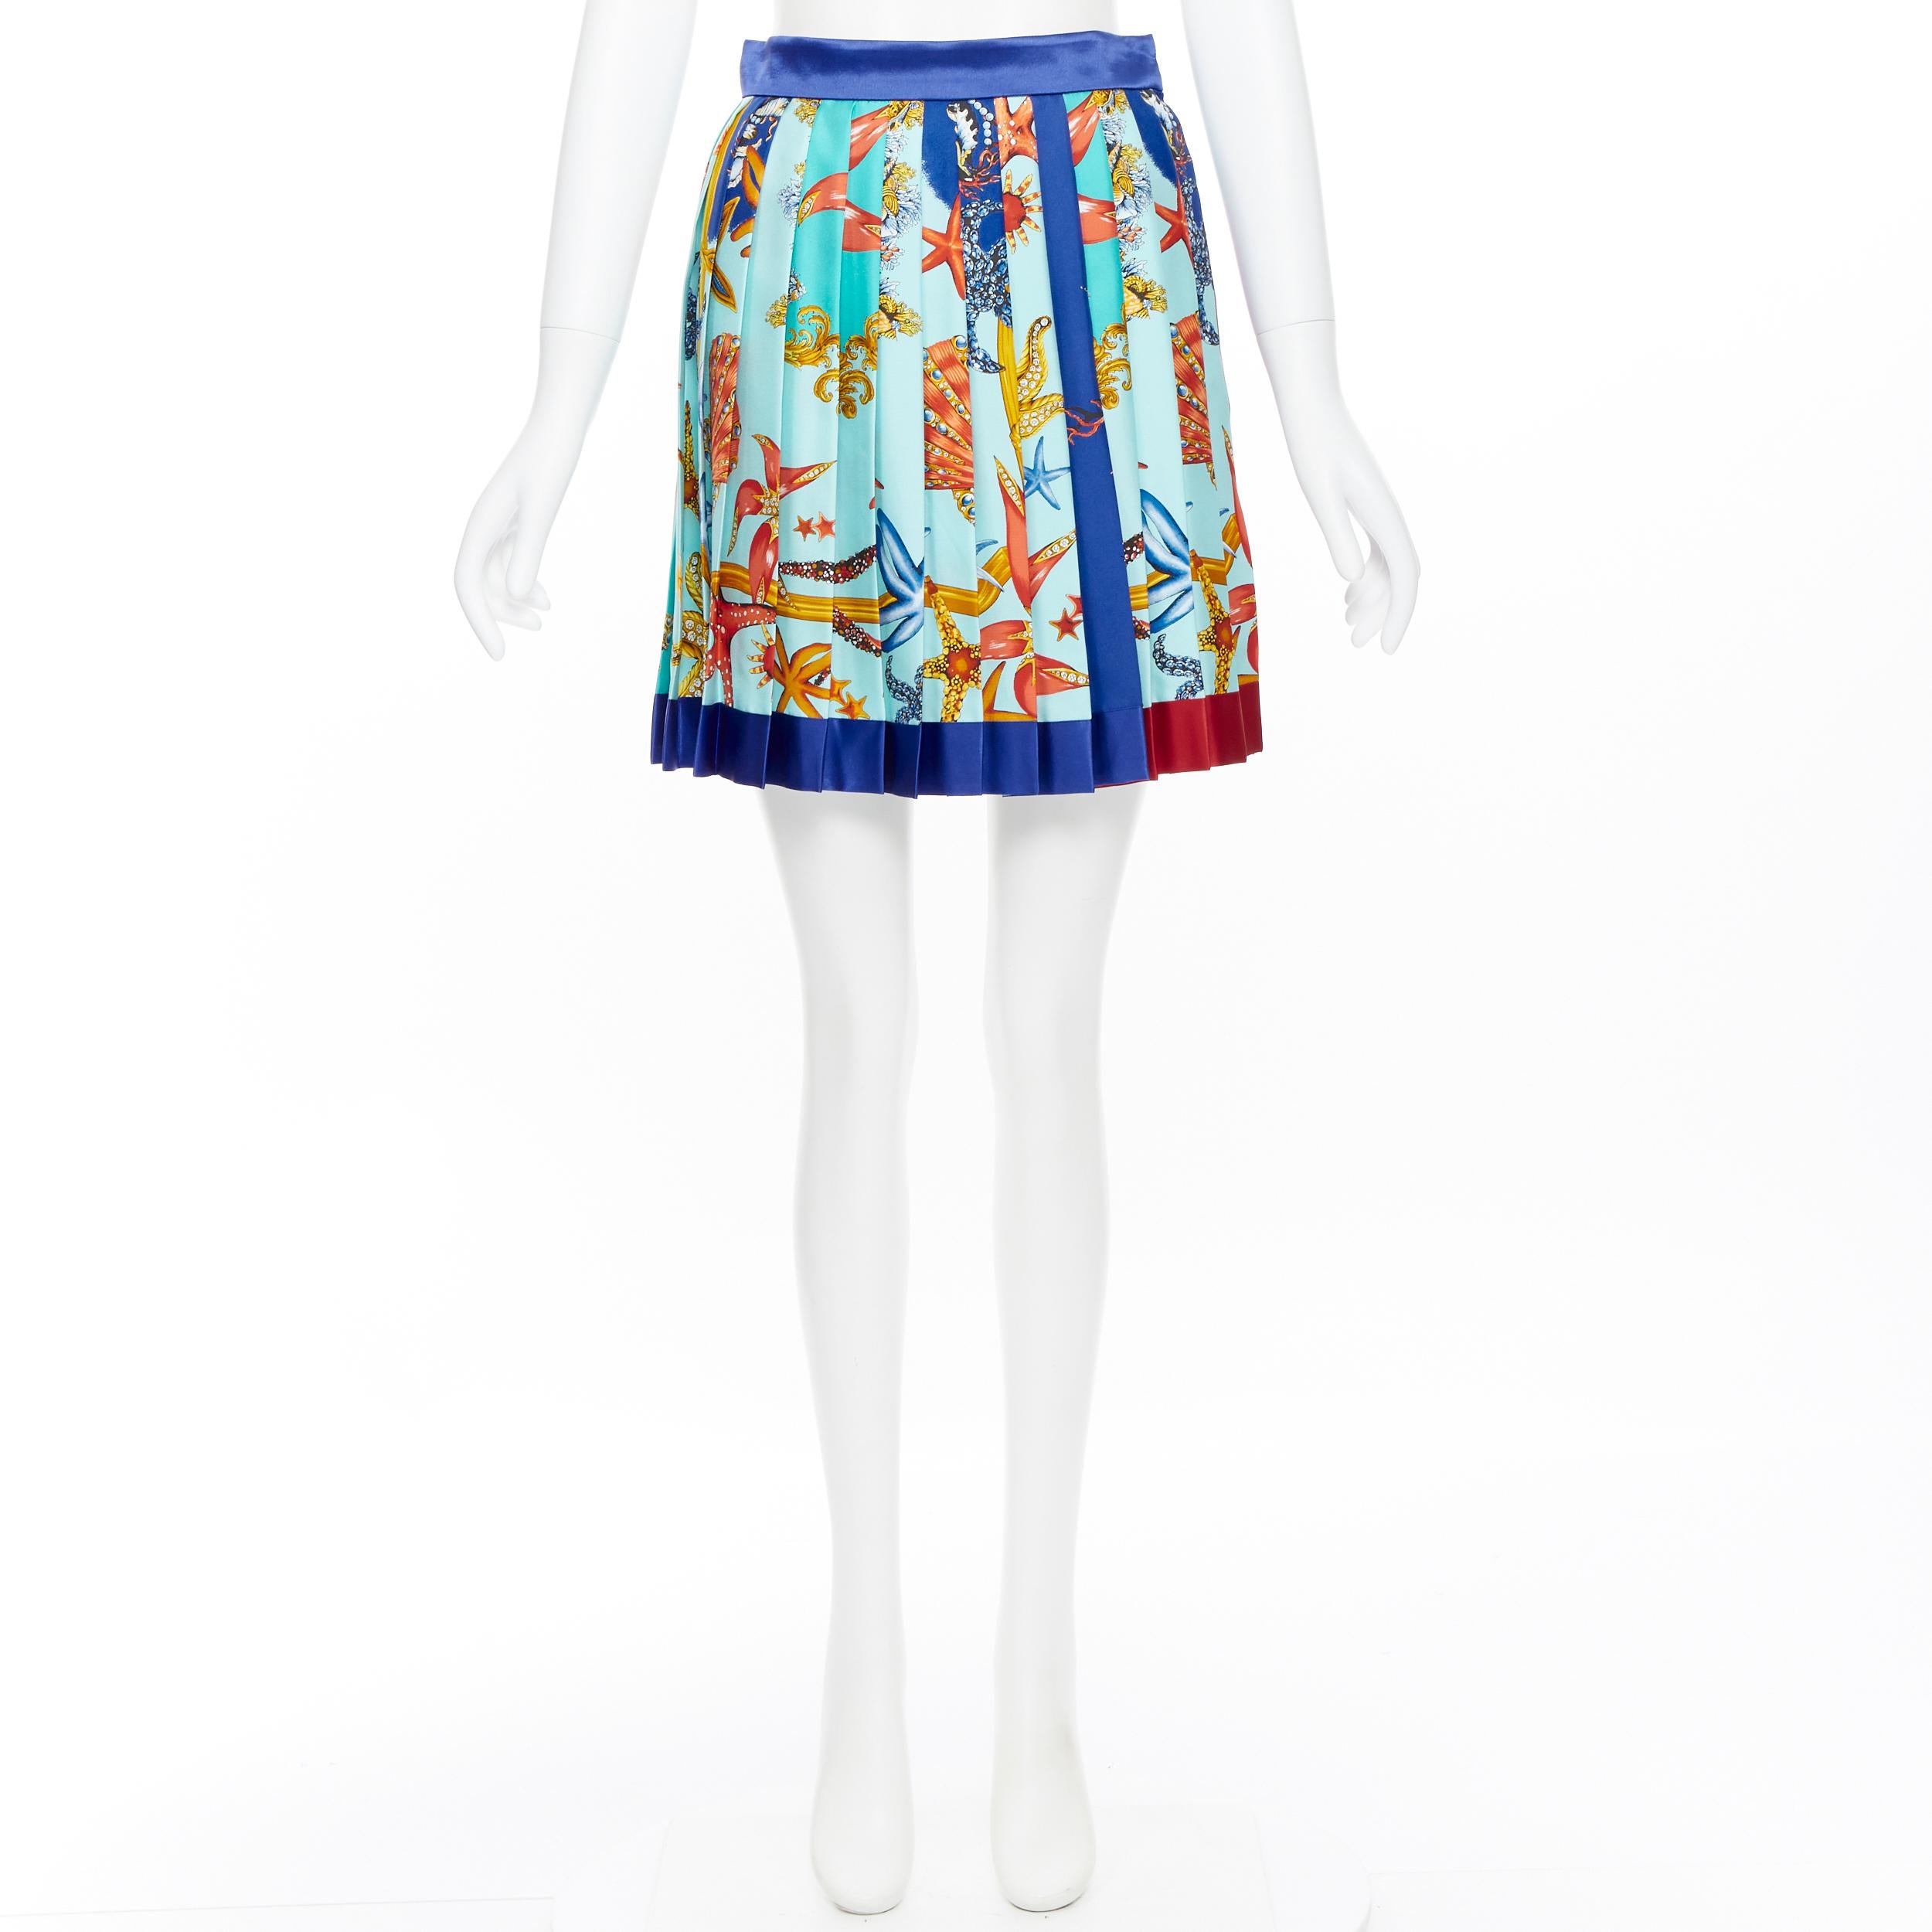 new VERSACE Runway Tribute Tresor De La Mer SS1992 pleated silk mini skirt IT38
Brand: Versace
Designer: Donatella Versace
Collection: SS18
Model Name / Style: Pleated silk skirt
Material: Silk
Color: Multicolour
Pattern: Abstract
Closure: Zip
Extra